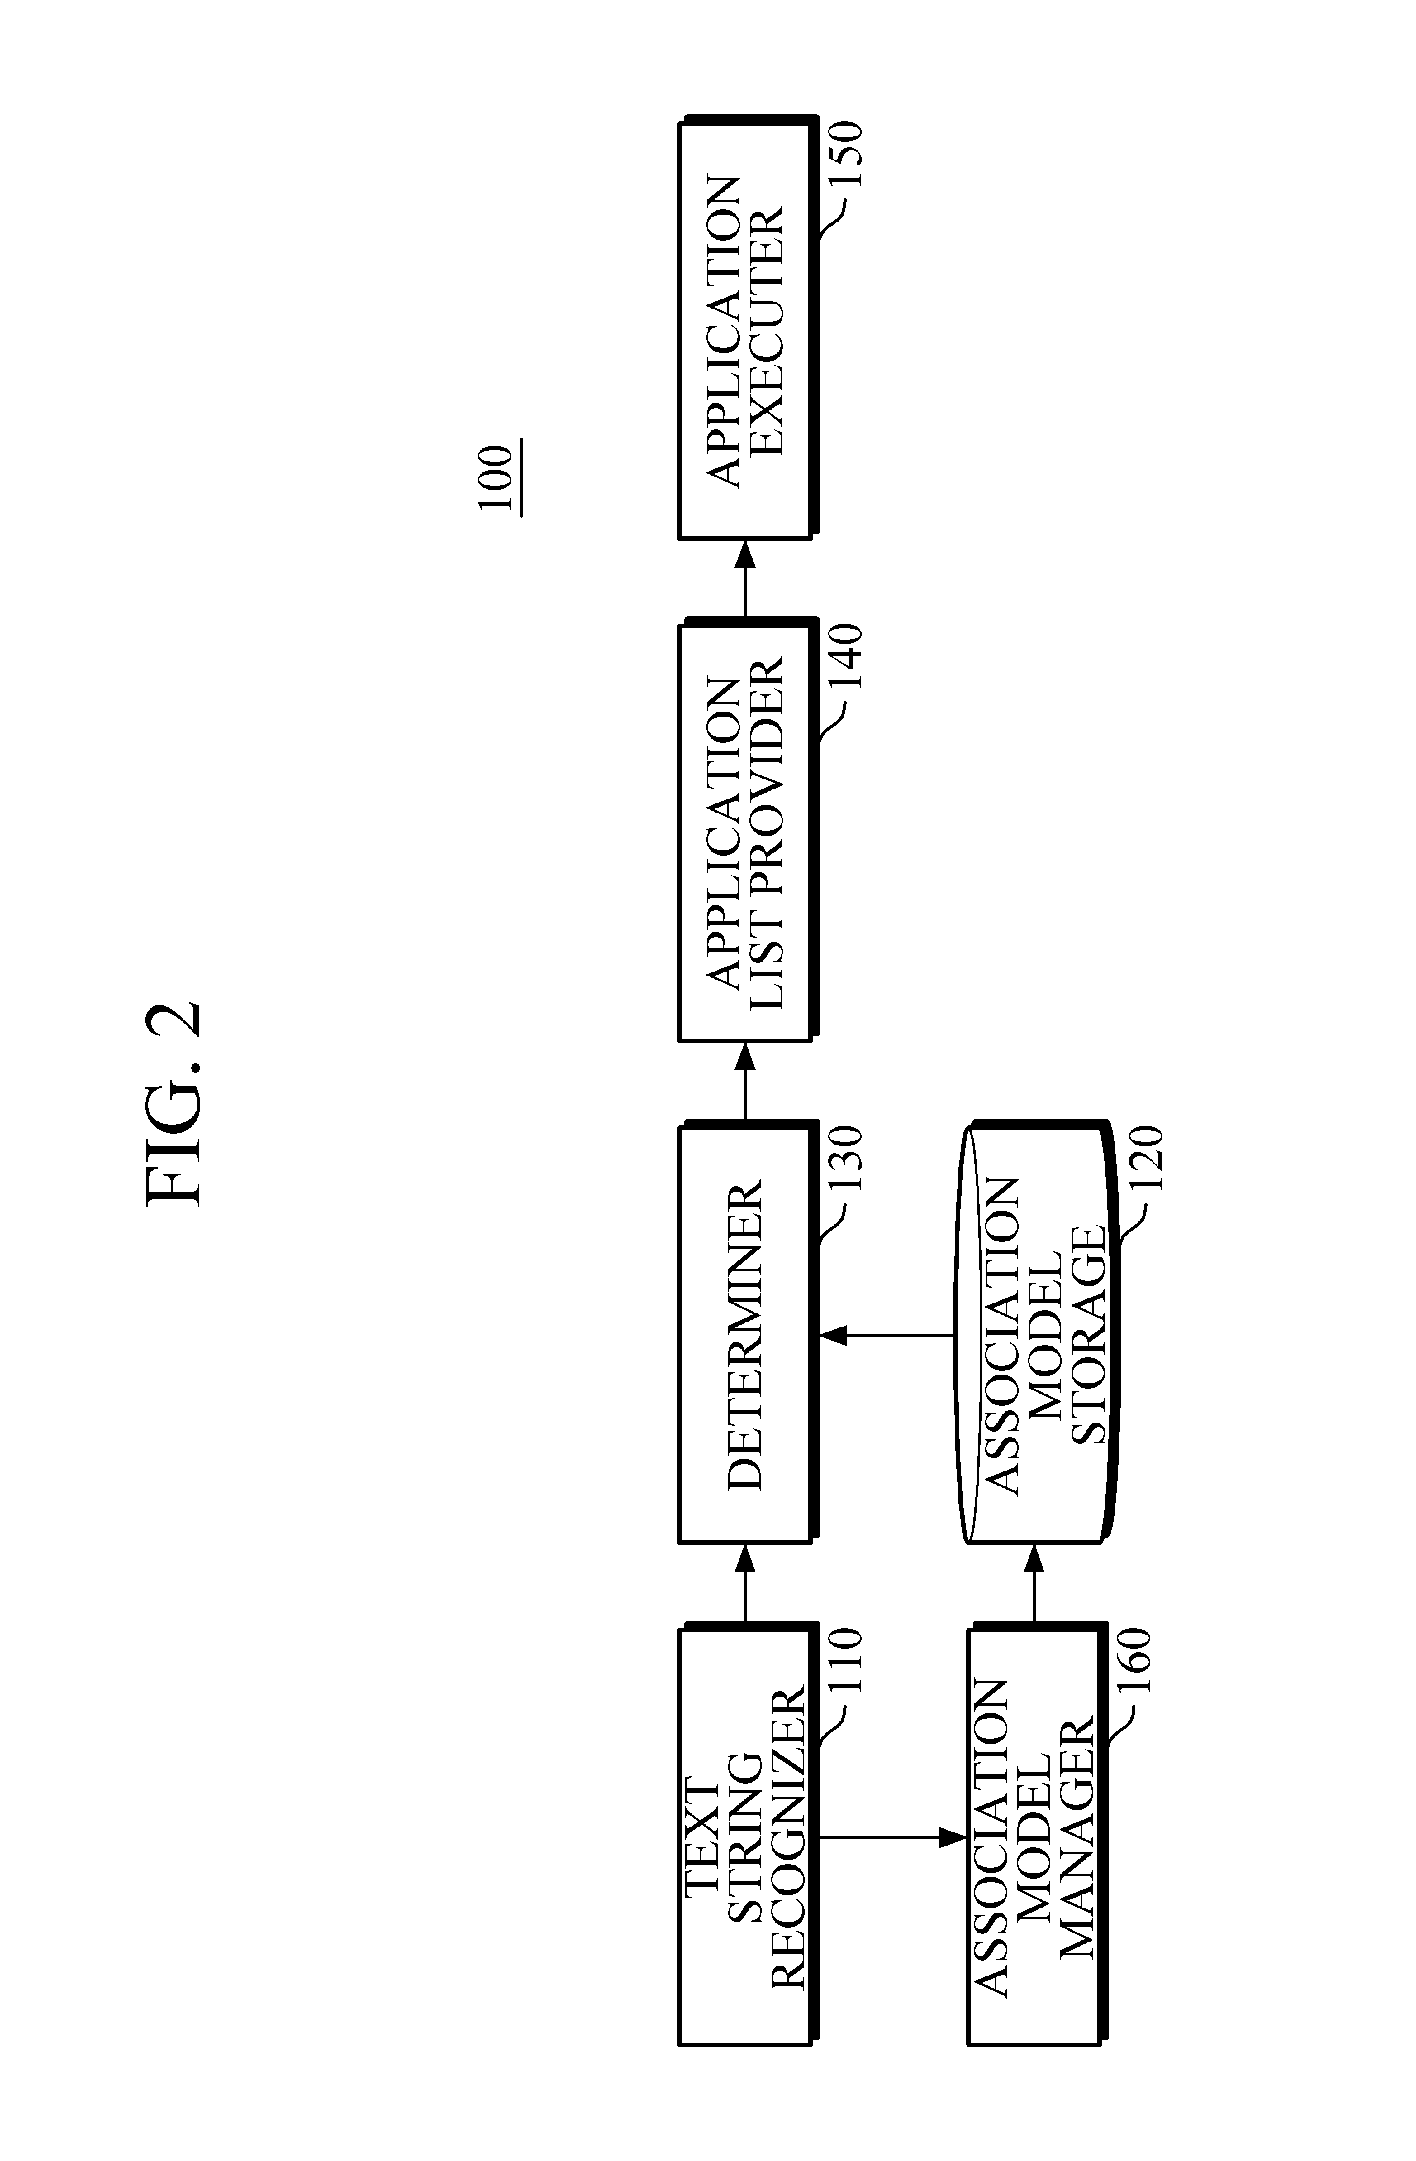 Apparatus and method for executing application